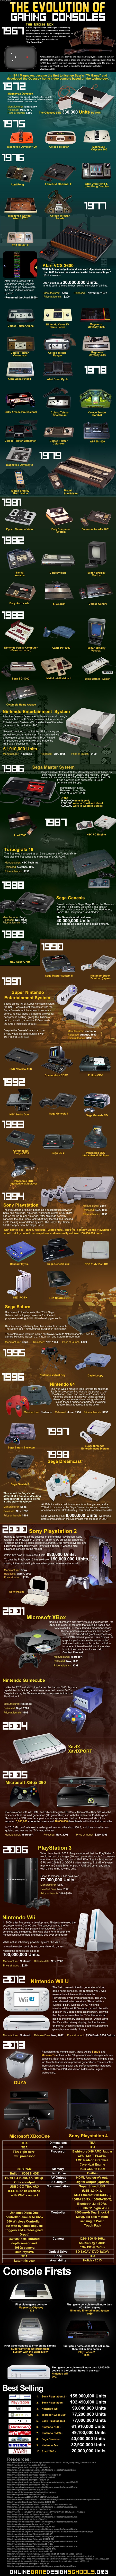 evolution_of_gaming_consoles.jpg